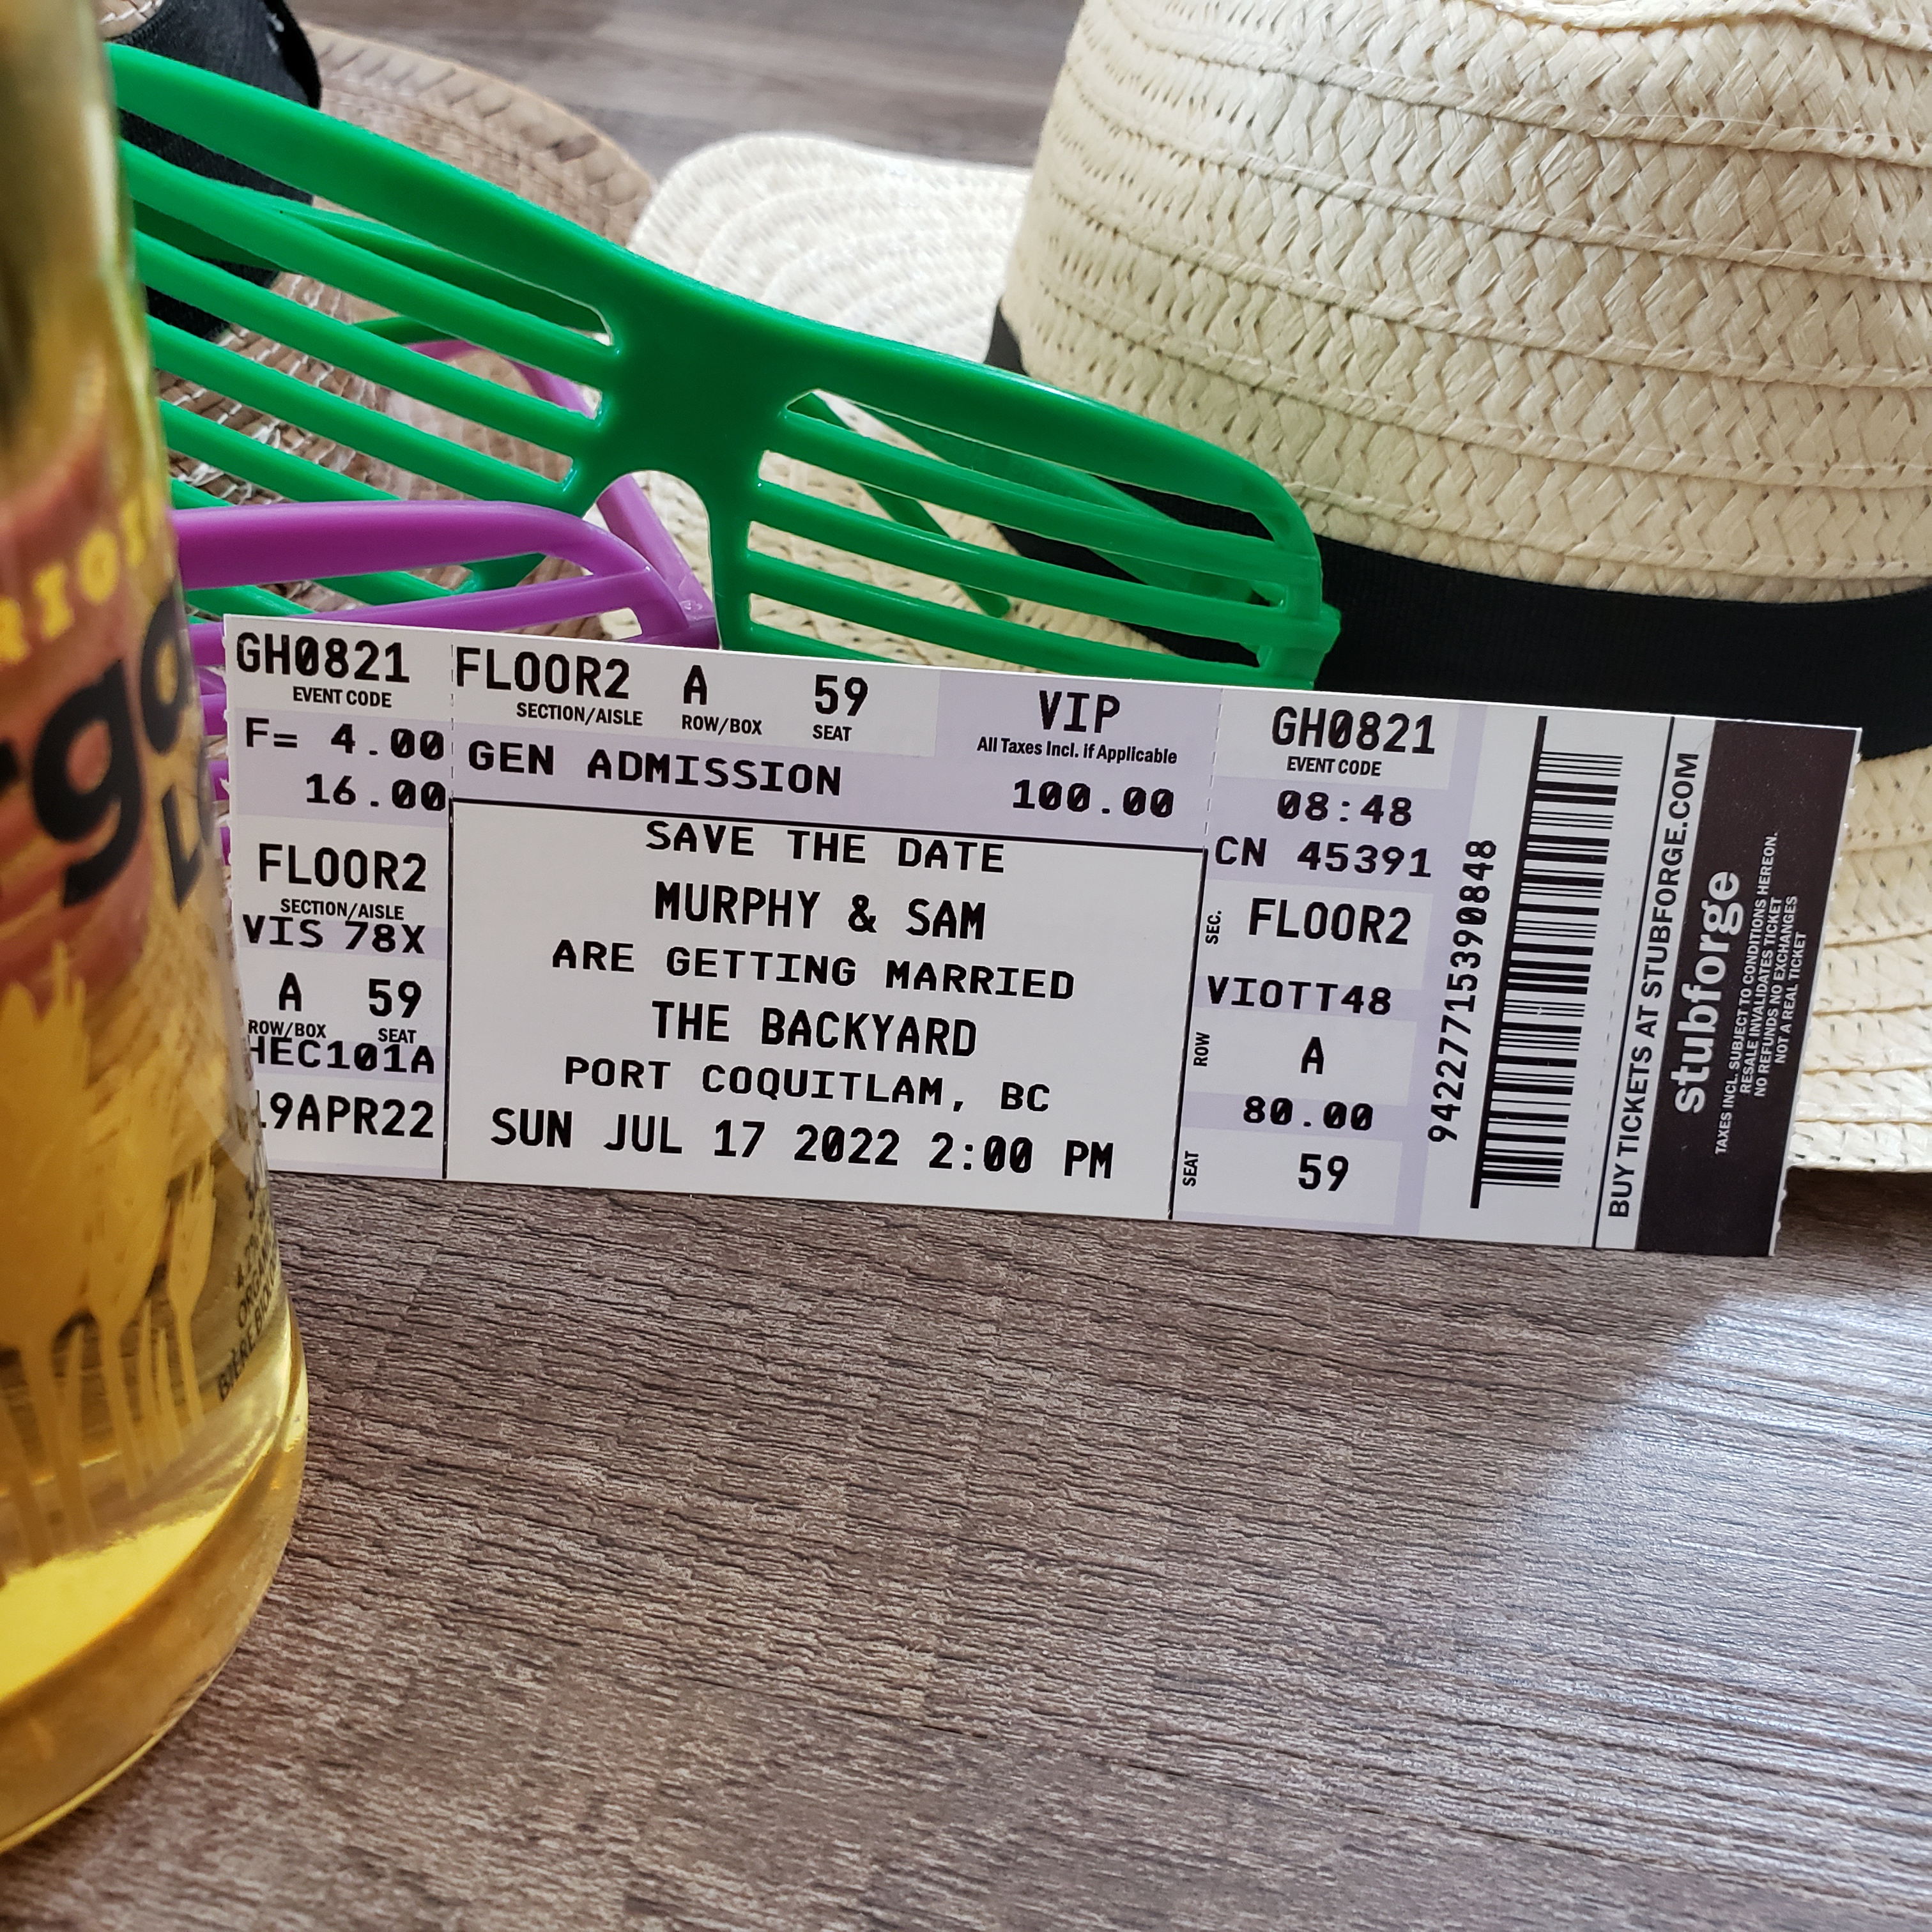 User submitted photo of ticket